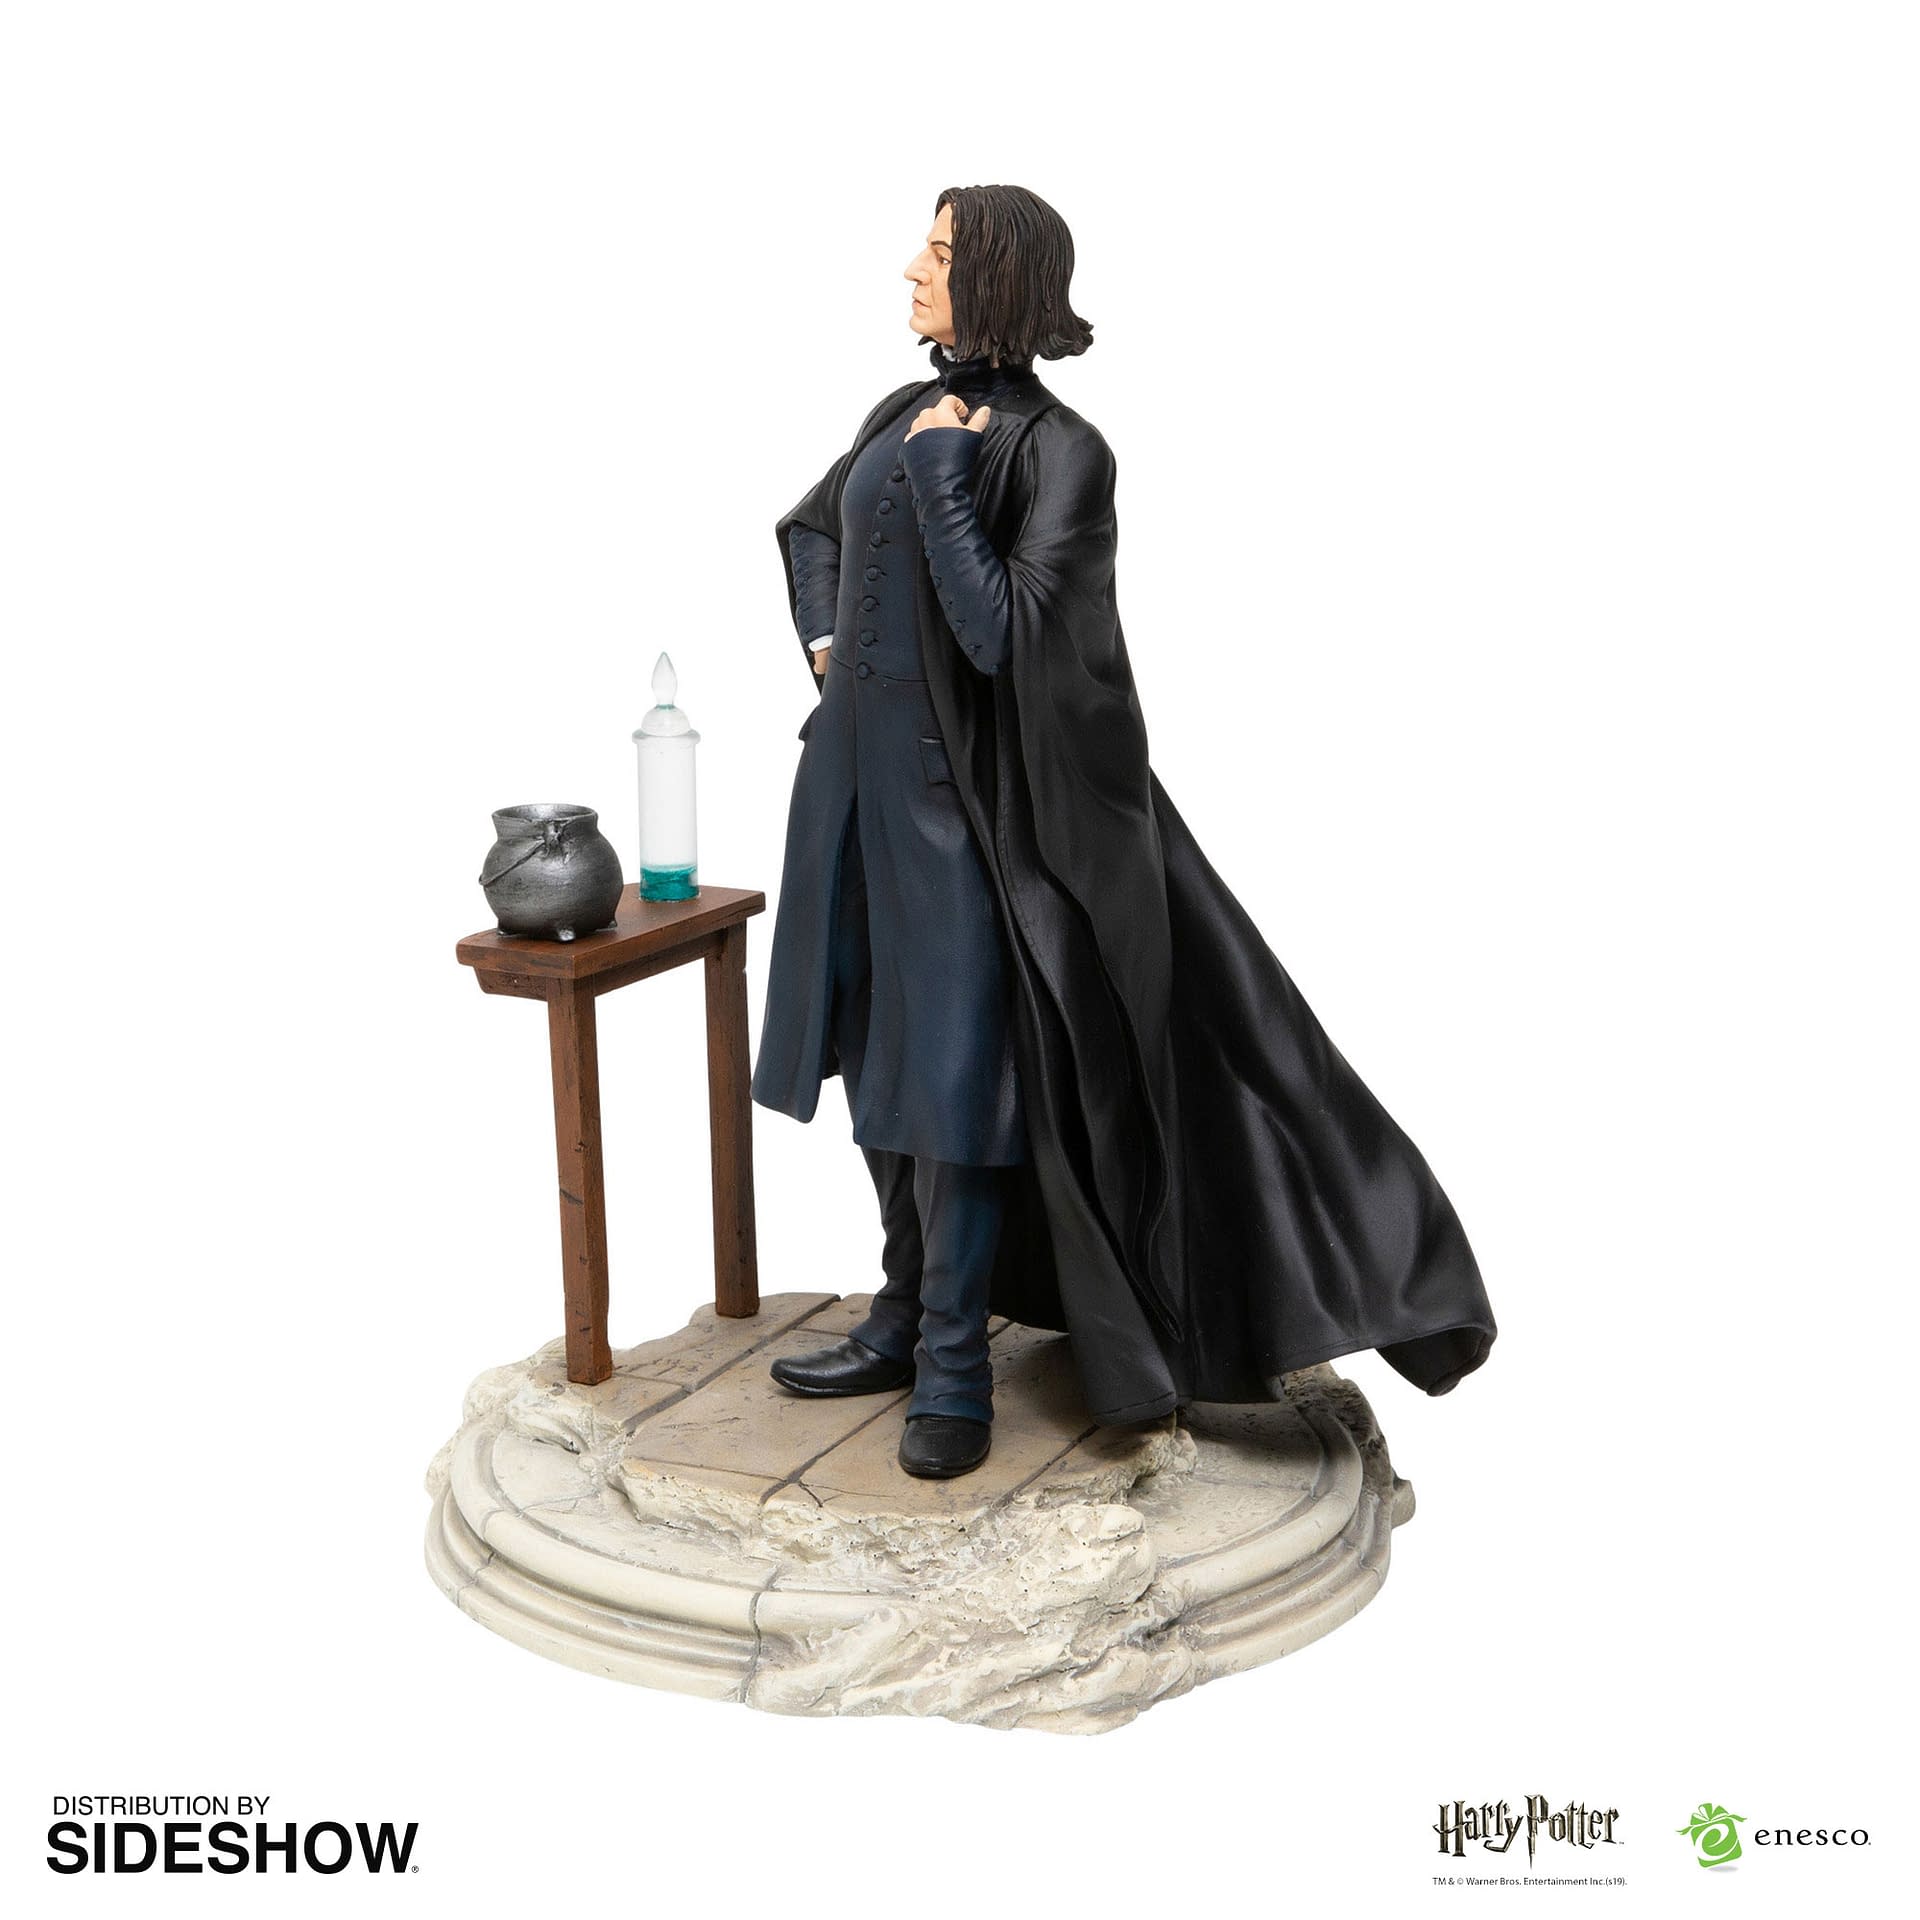 Professor Snape Is Your Dark Arts Teacher with a New Statue